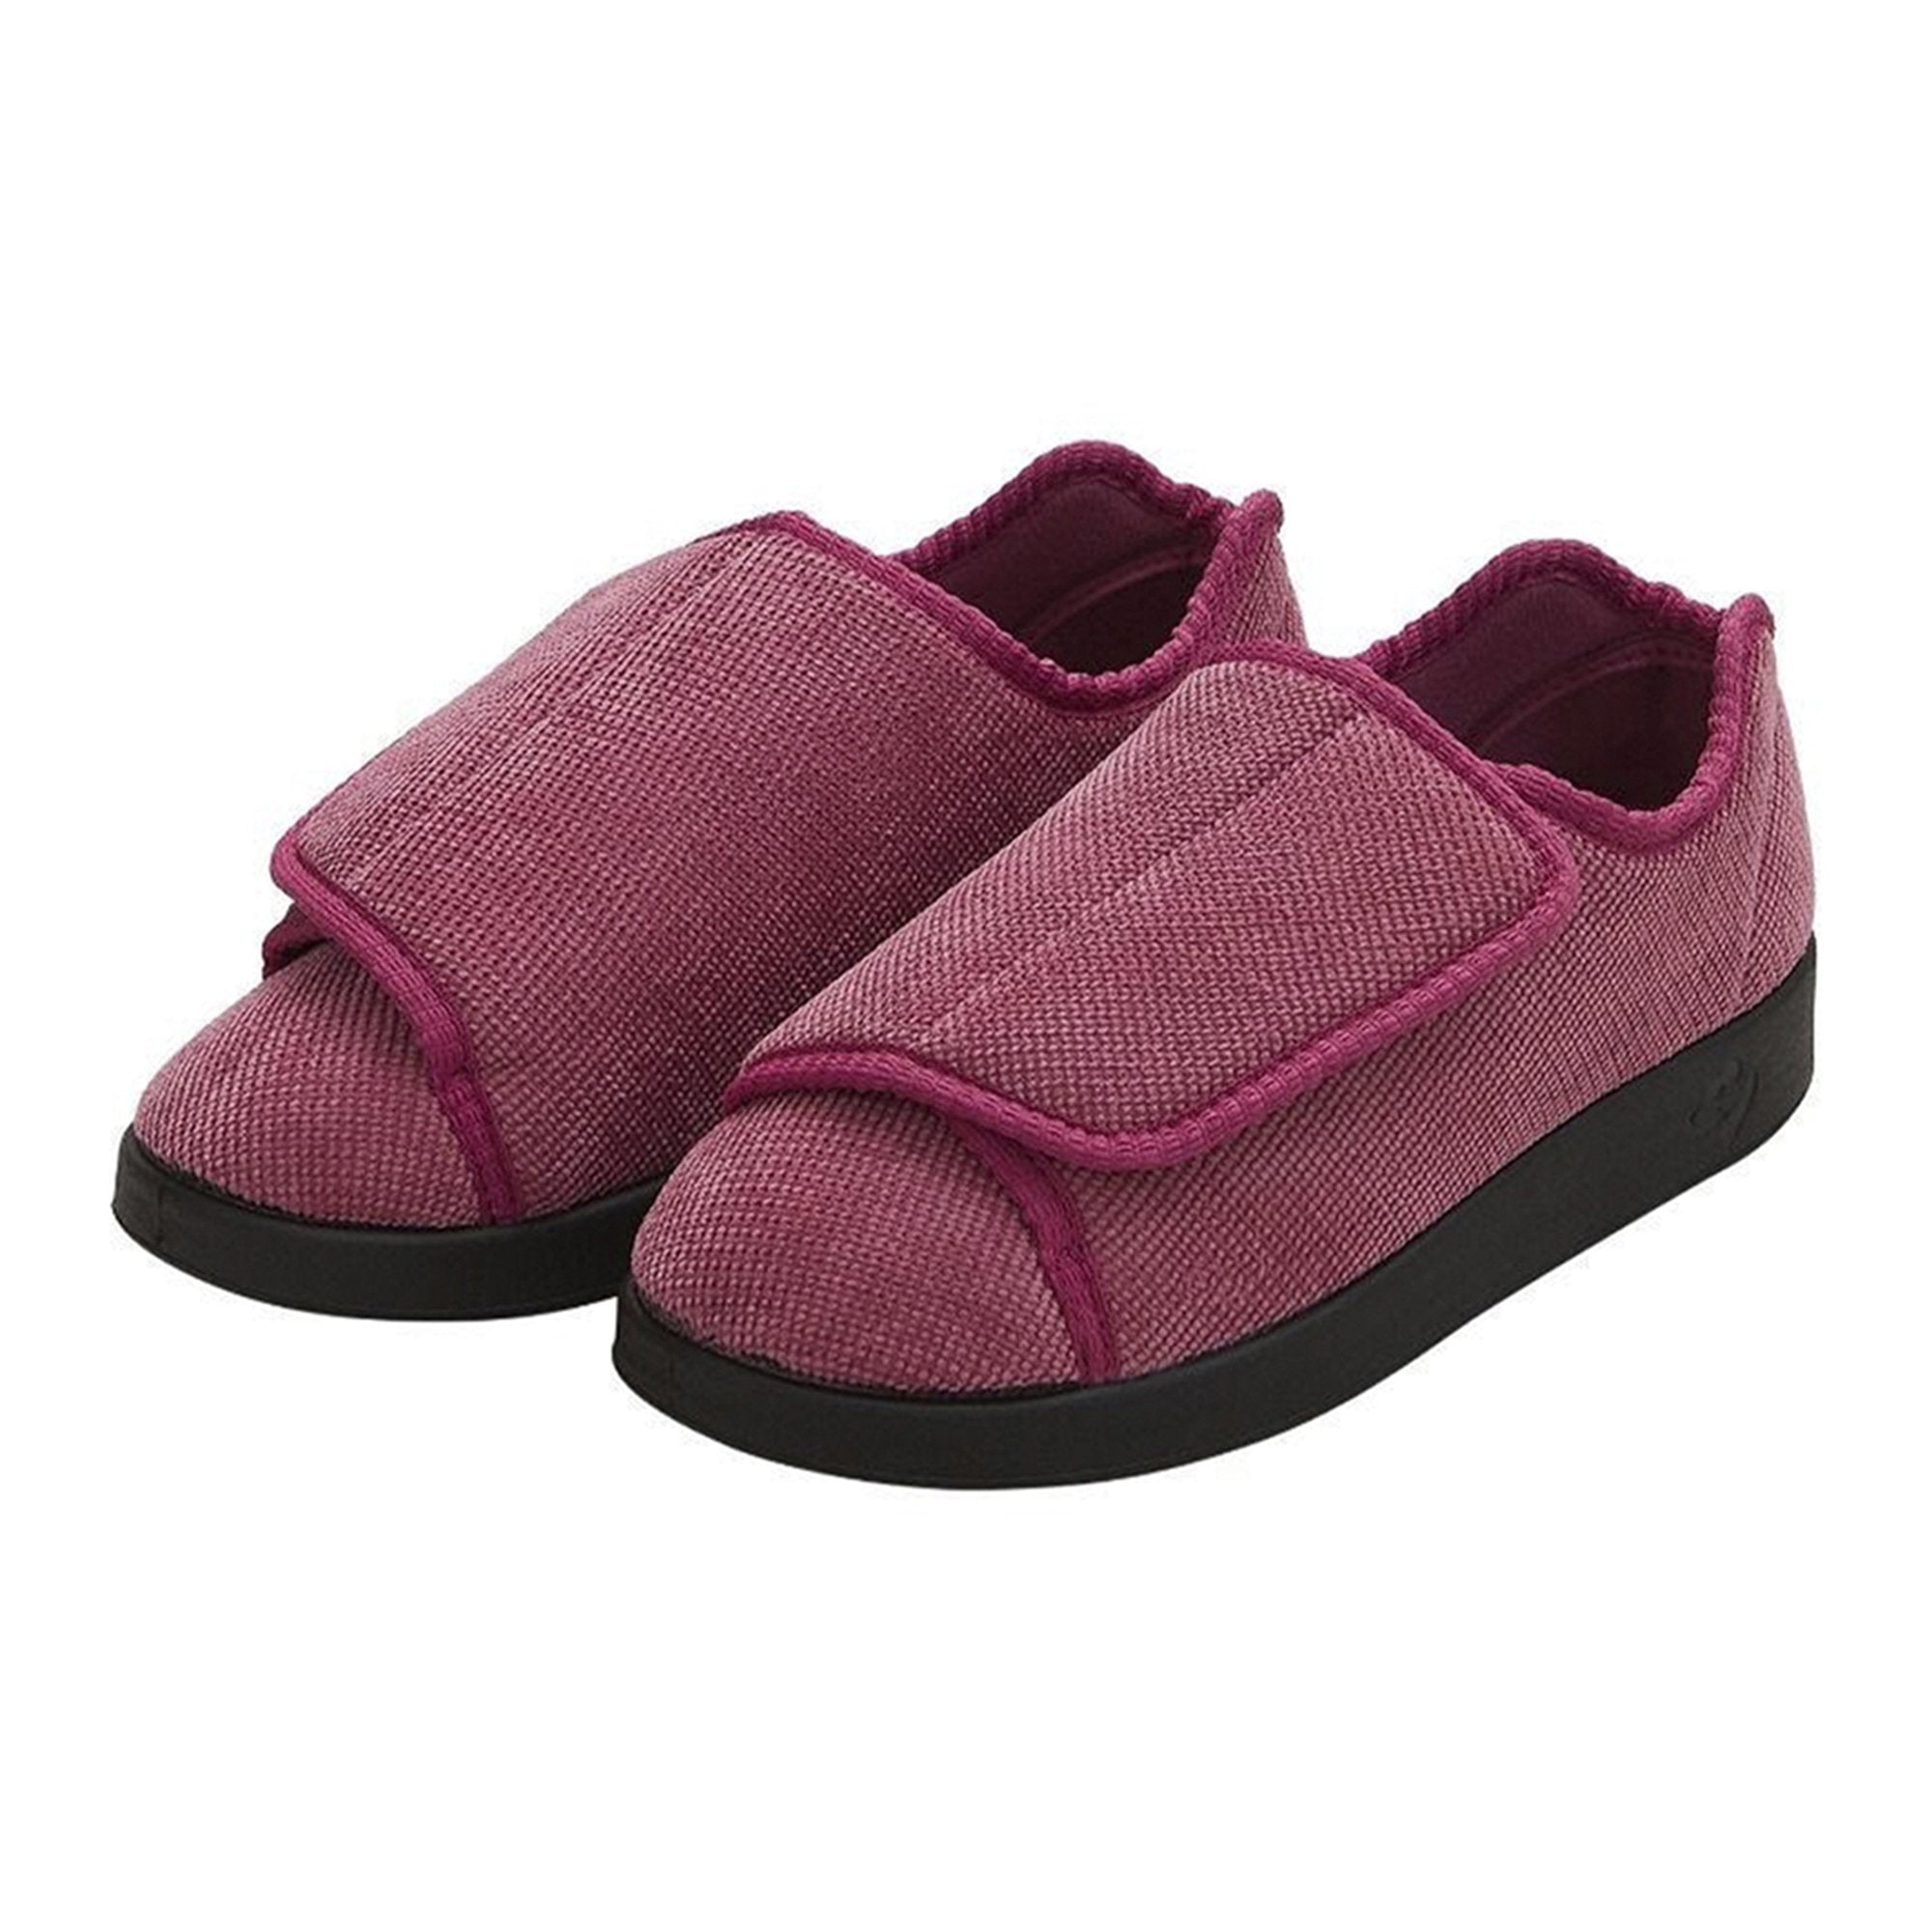 Slippers Silverts® Size 12 / 2X-Wide Dusty Rose Easy Closure